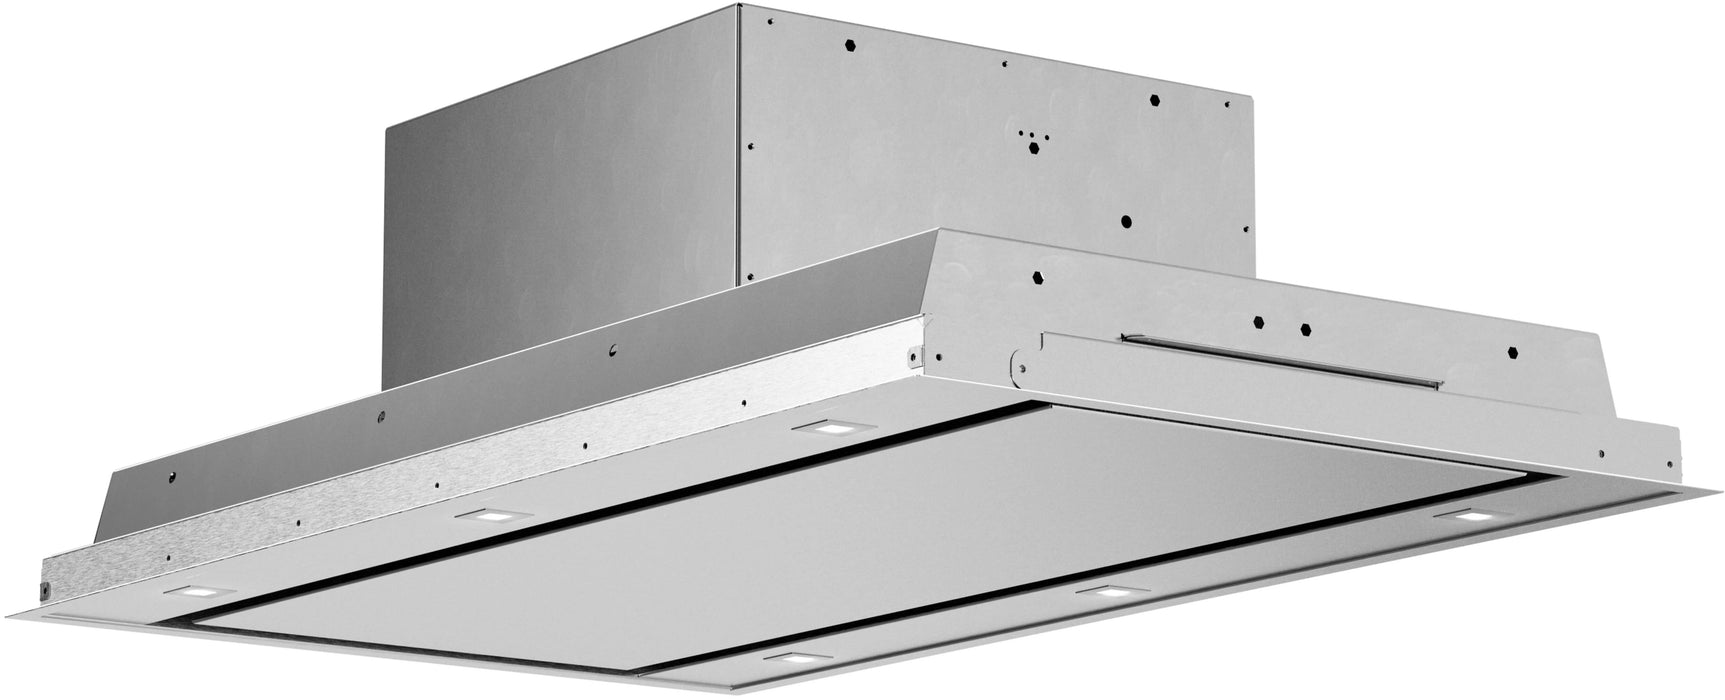 Forté Vertice Recessed Ceiling Mount Hood with 600 CFM in Stainless Steel VERTICE48 - Farmhouse Kitchen and Bath